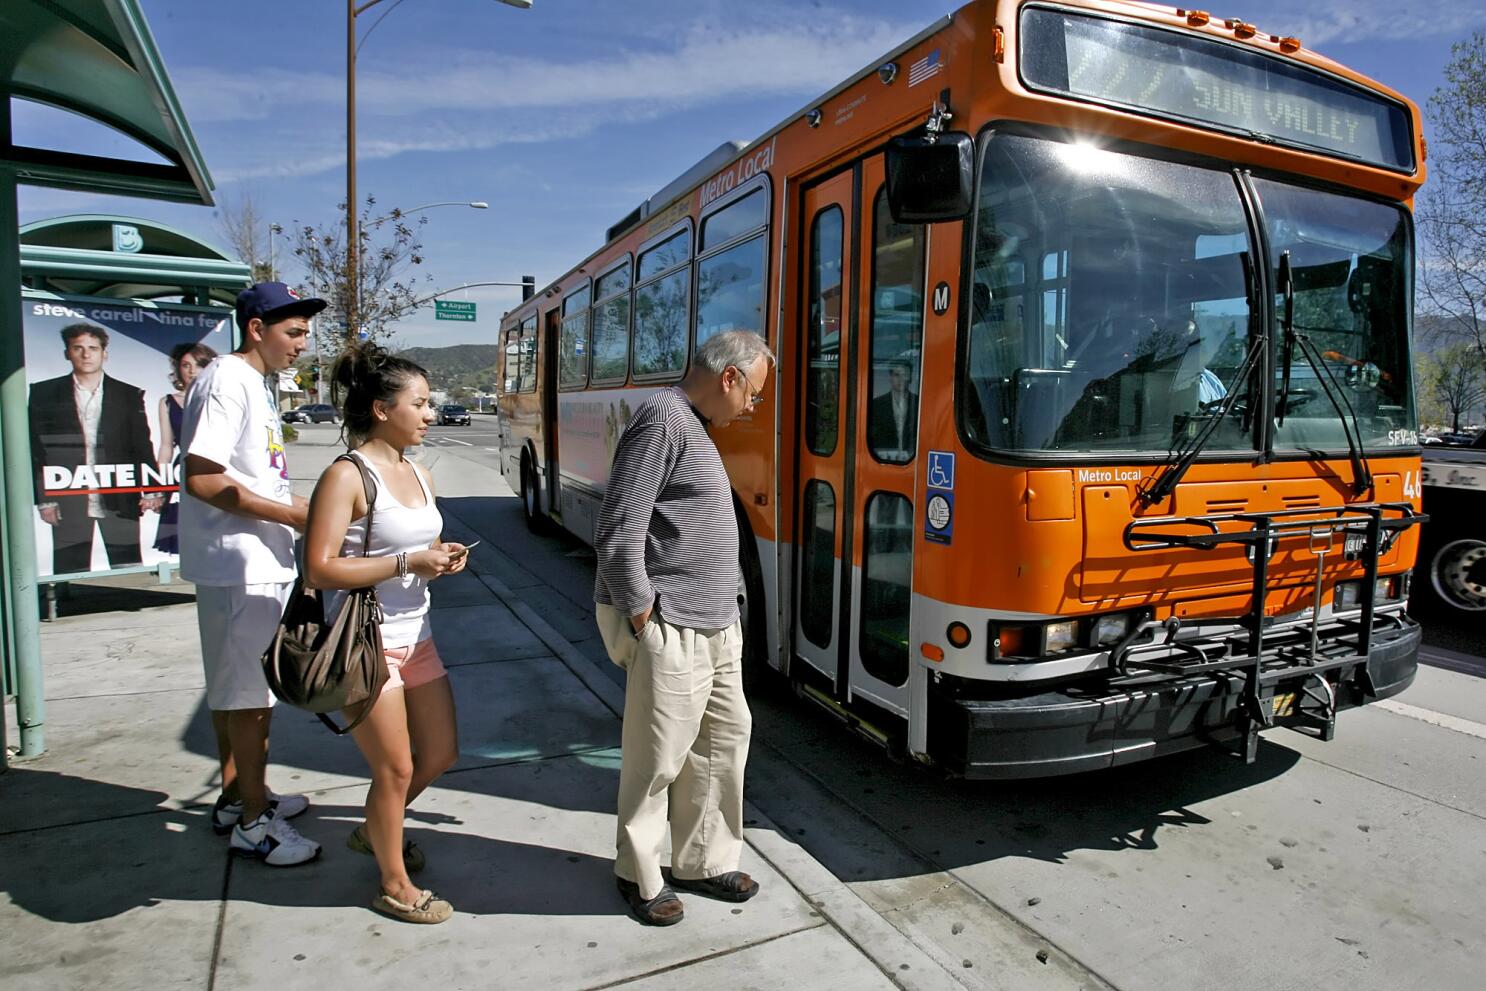 15-facts-about-transportation-and-infrastructure-in-san-gabriel-california